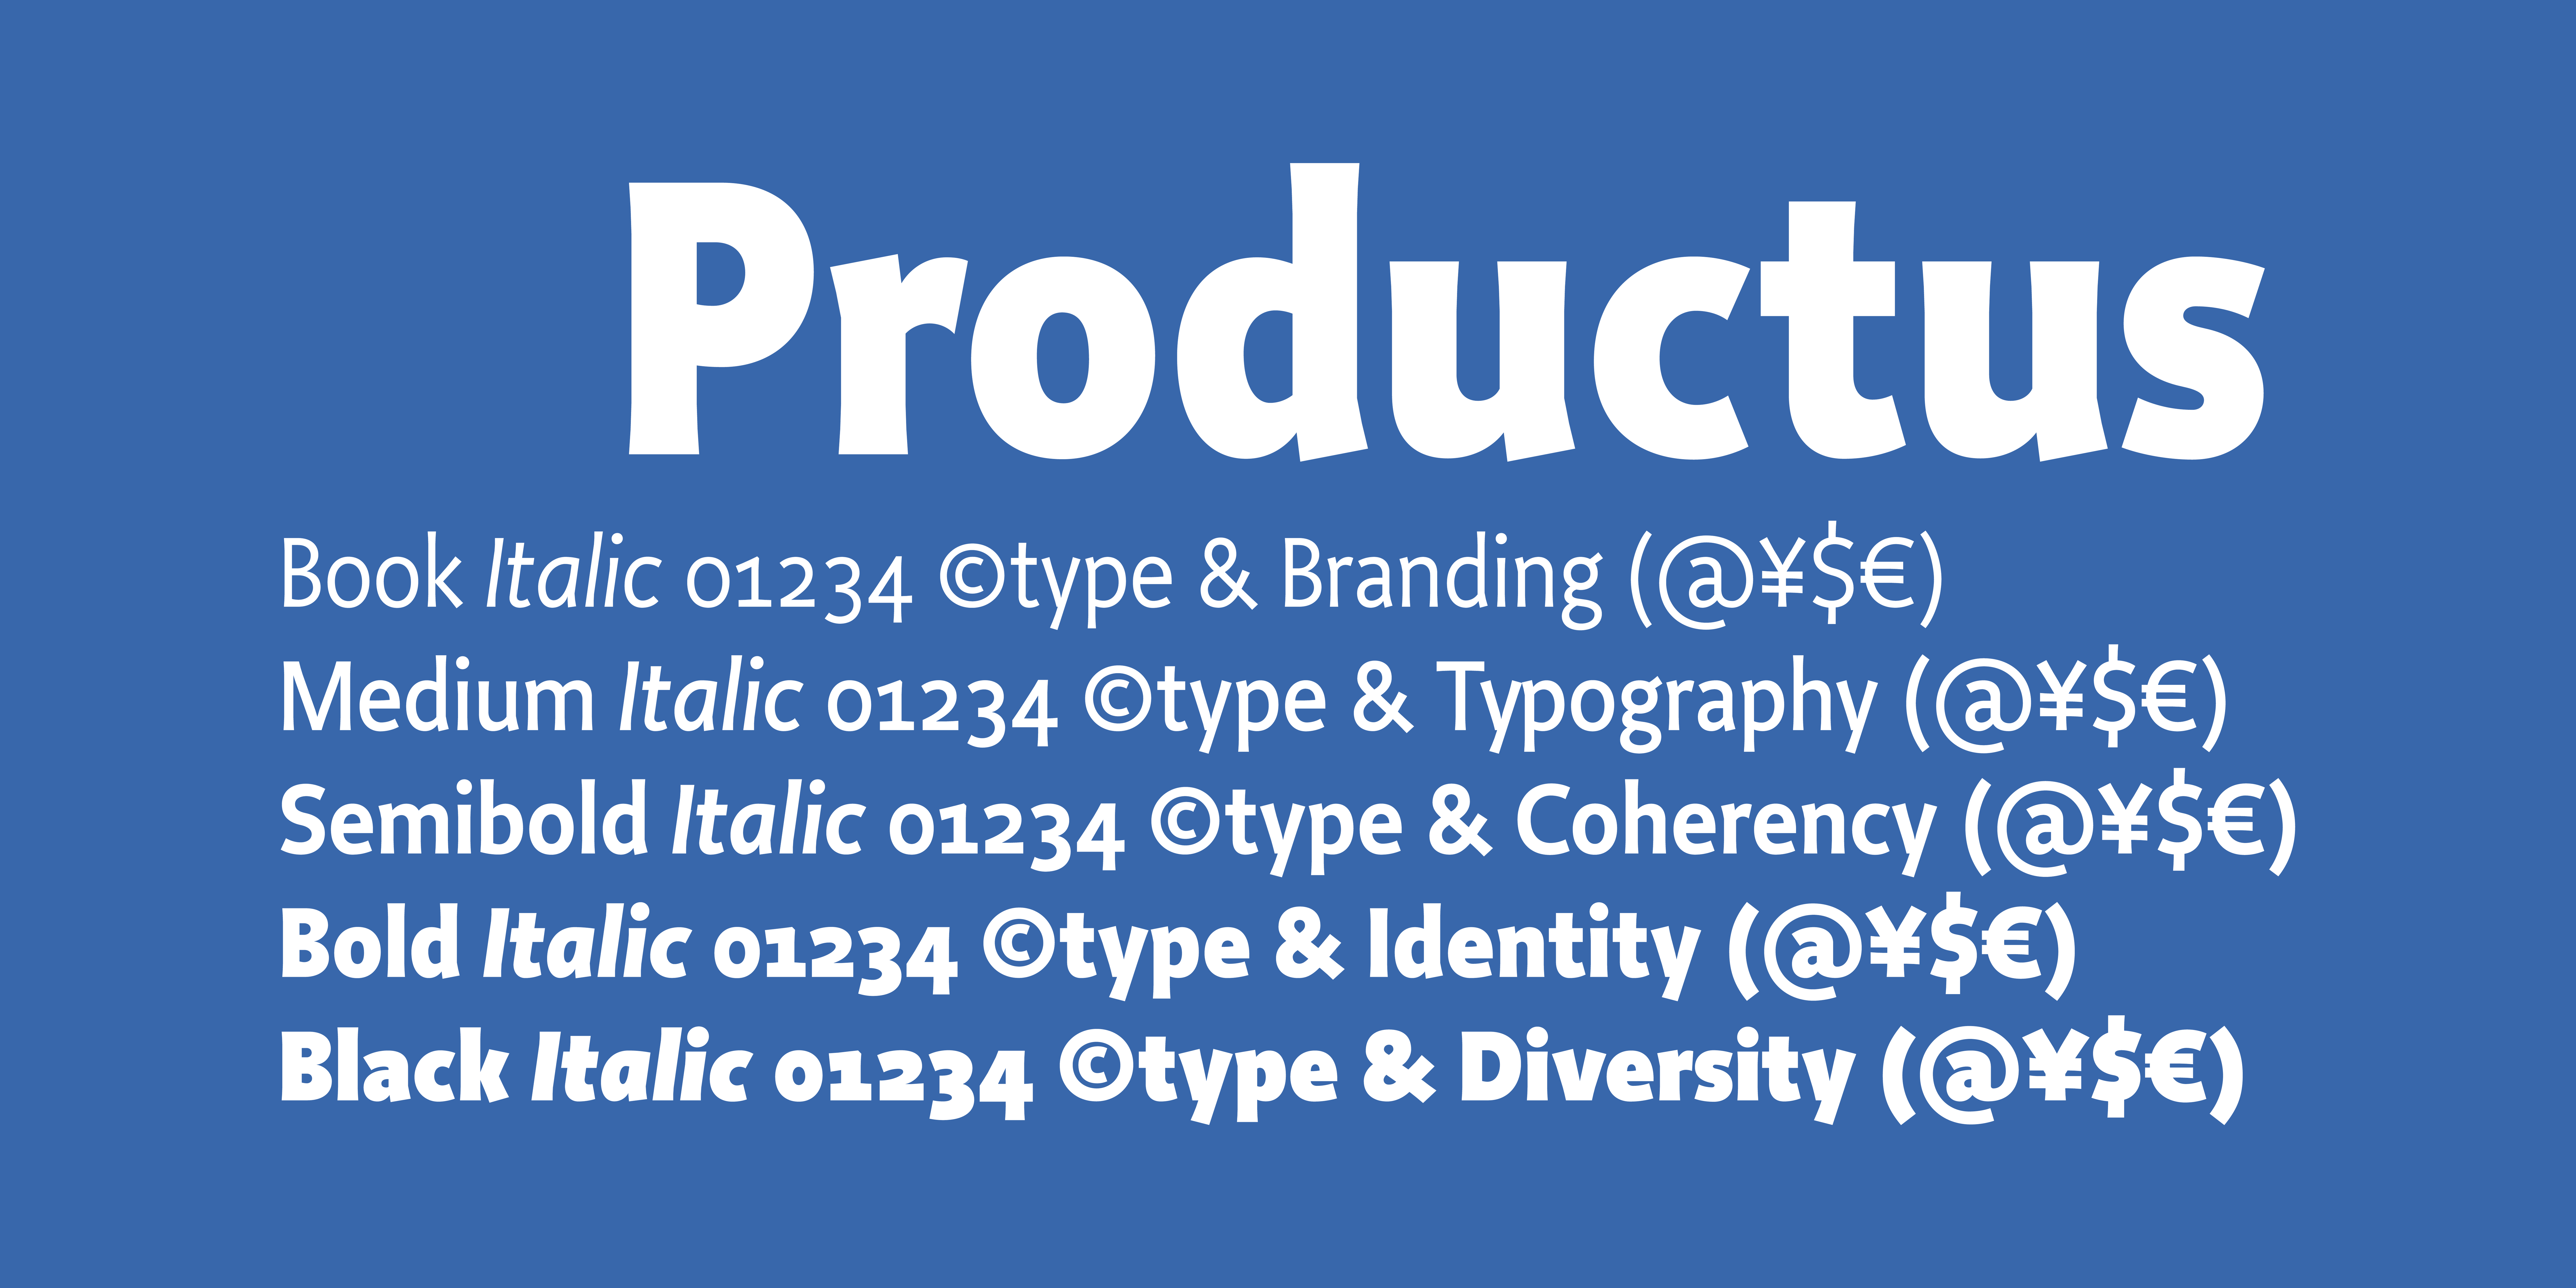 Card displaying Productus typeface in various styles